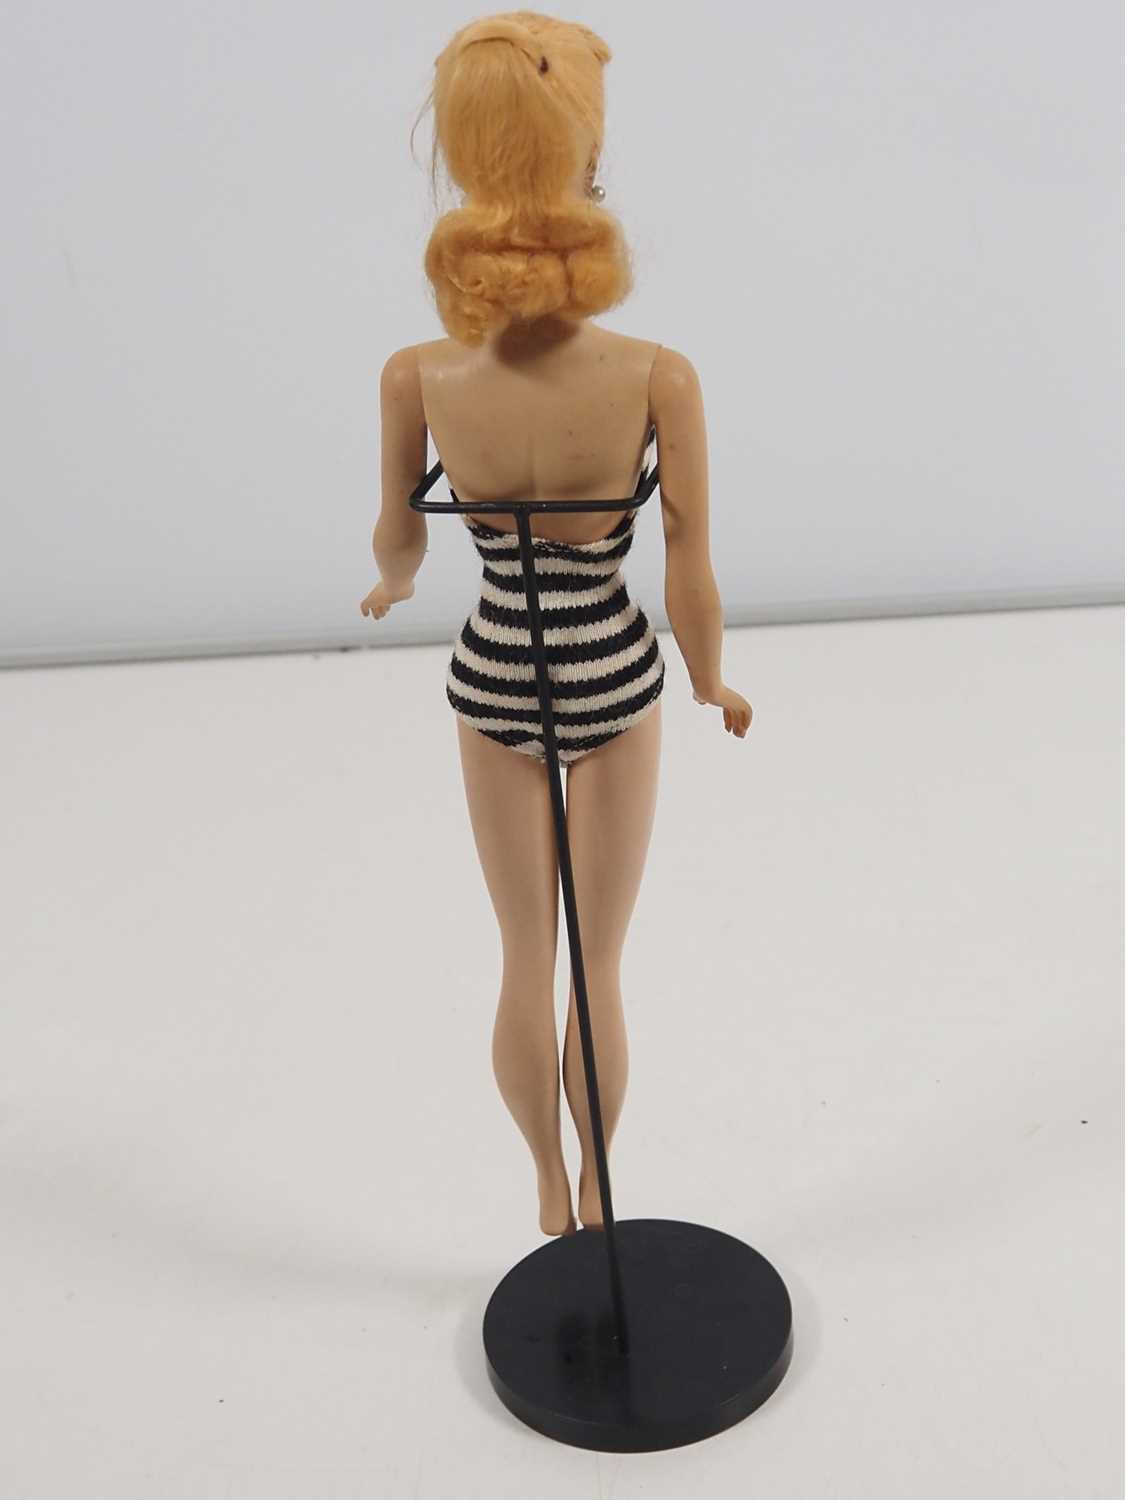 An original vintage MATTEL BARBIE doll, circa 1959/60, complete with swimsuit, mule shoes, - Image 2 of 9